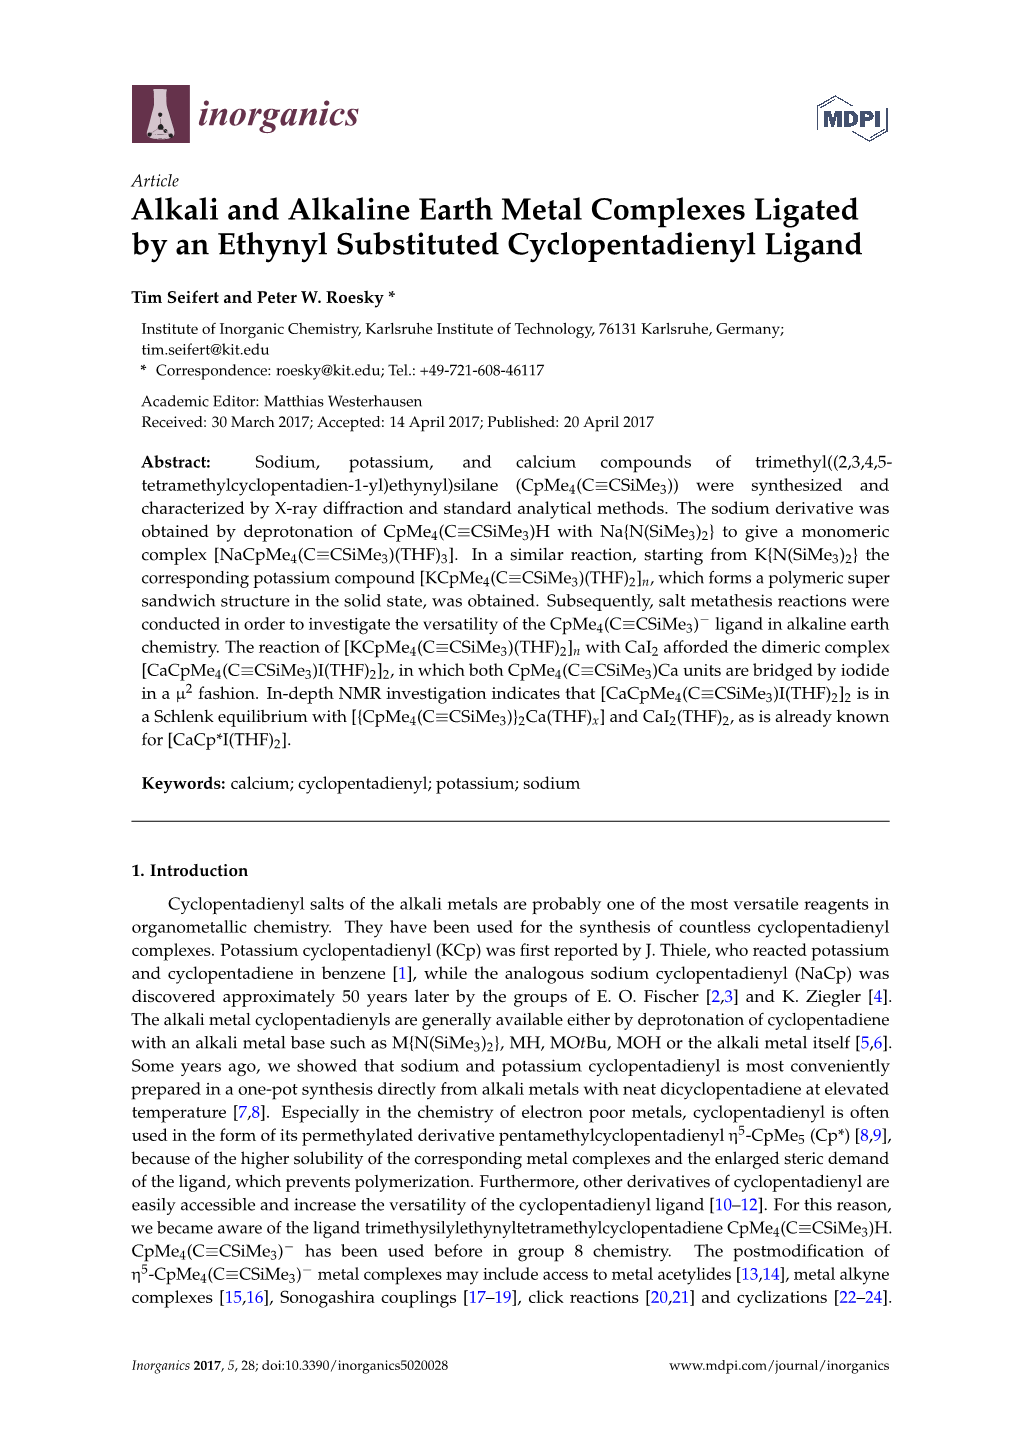 Alkali and Alkaline Earth Metal Complexes Ligated by an Ethynyl Substituted Cyclopentadienyl Ligand